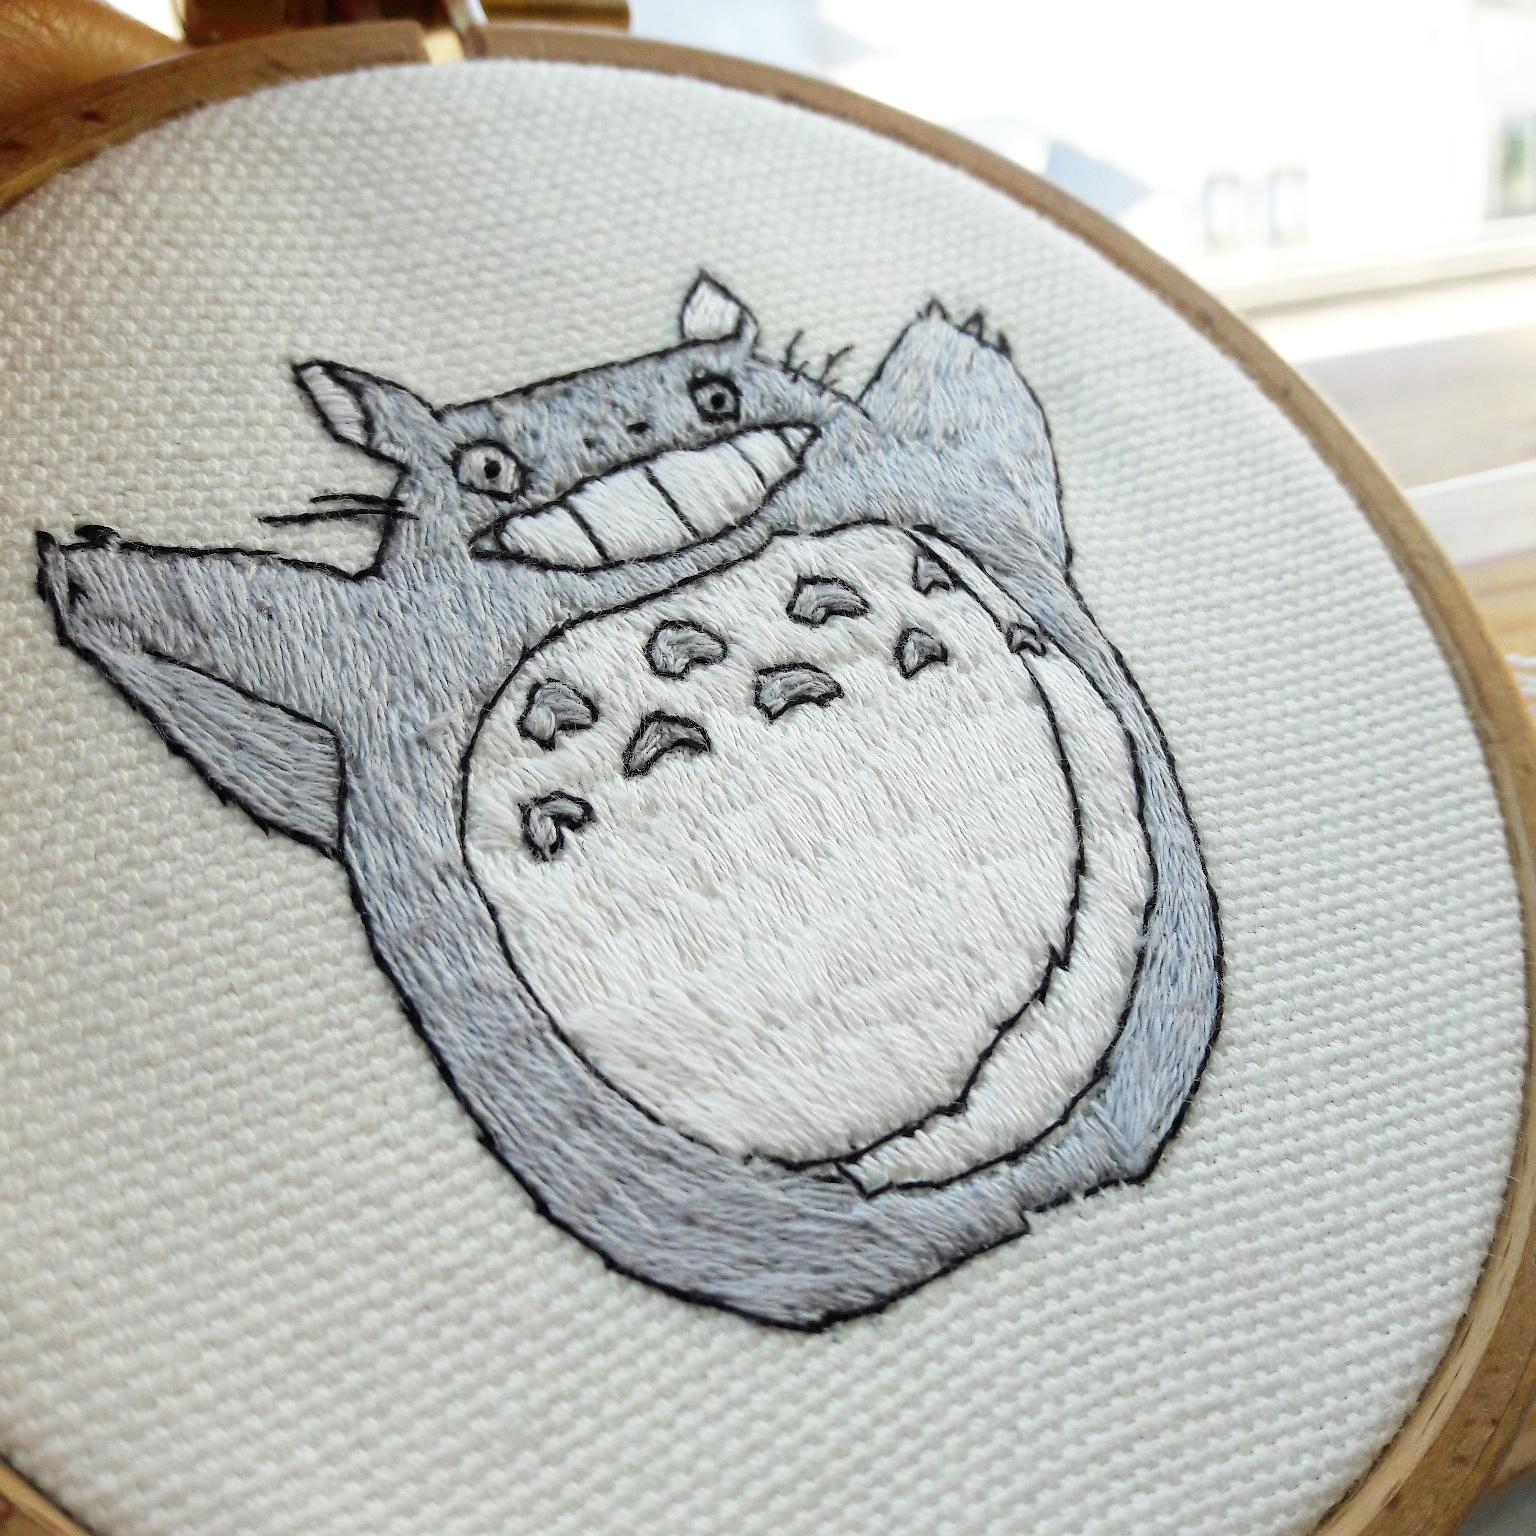 Totoro Embroidery Pattern I Made An Embroidery Of Totoro That I Will Cut For A Clothes Patch